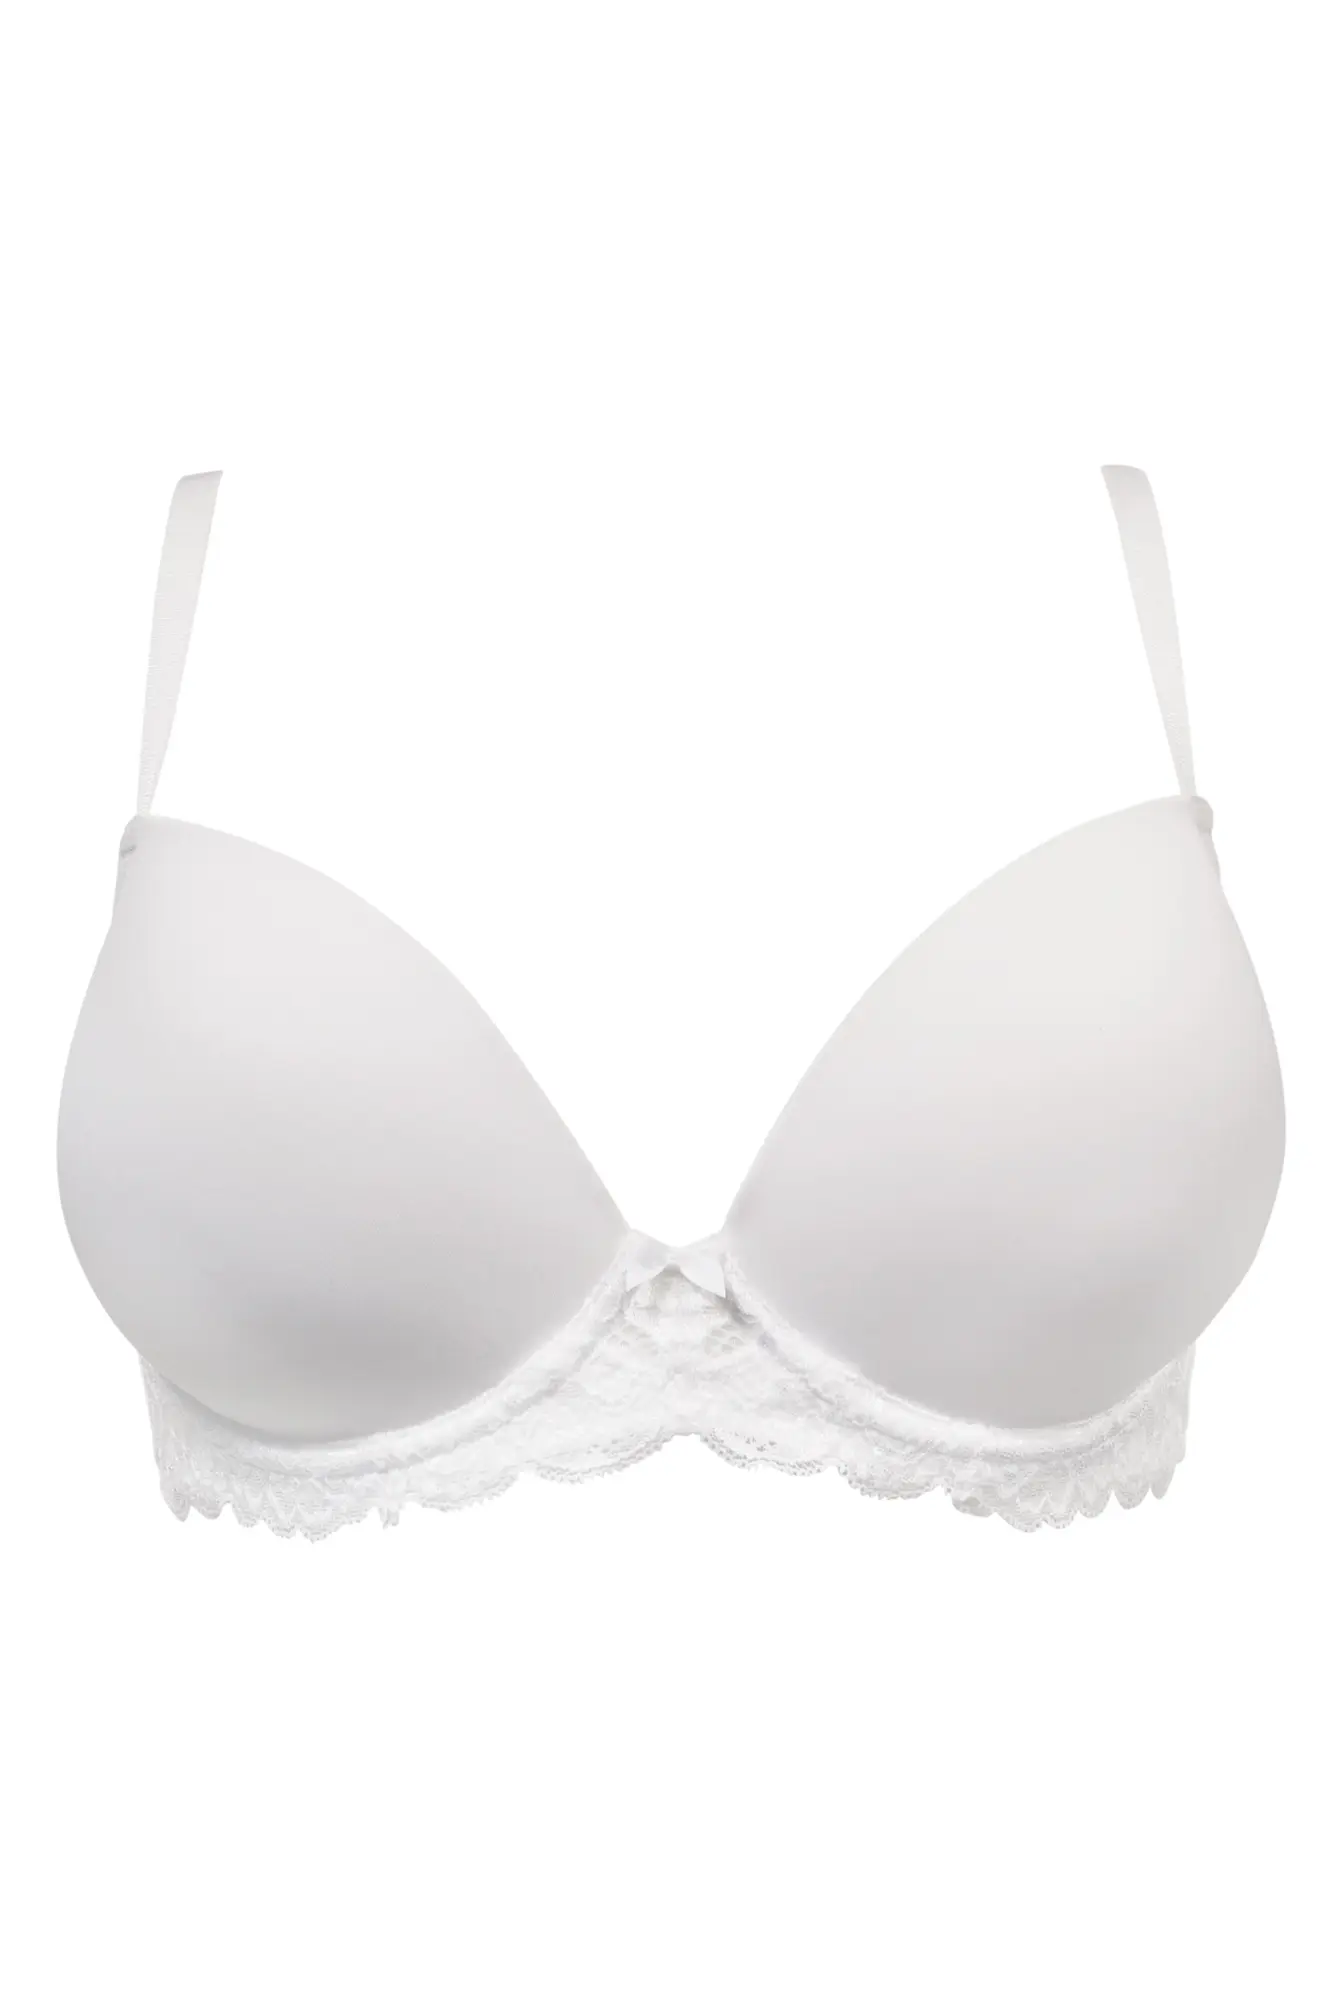 Forever Fiore Plunge Push Up Tshirt Bra Bundle | Black White and Almond ...